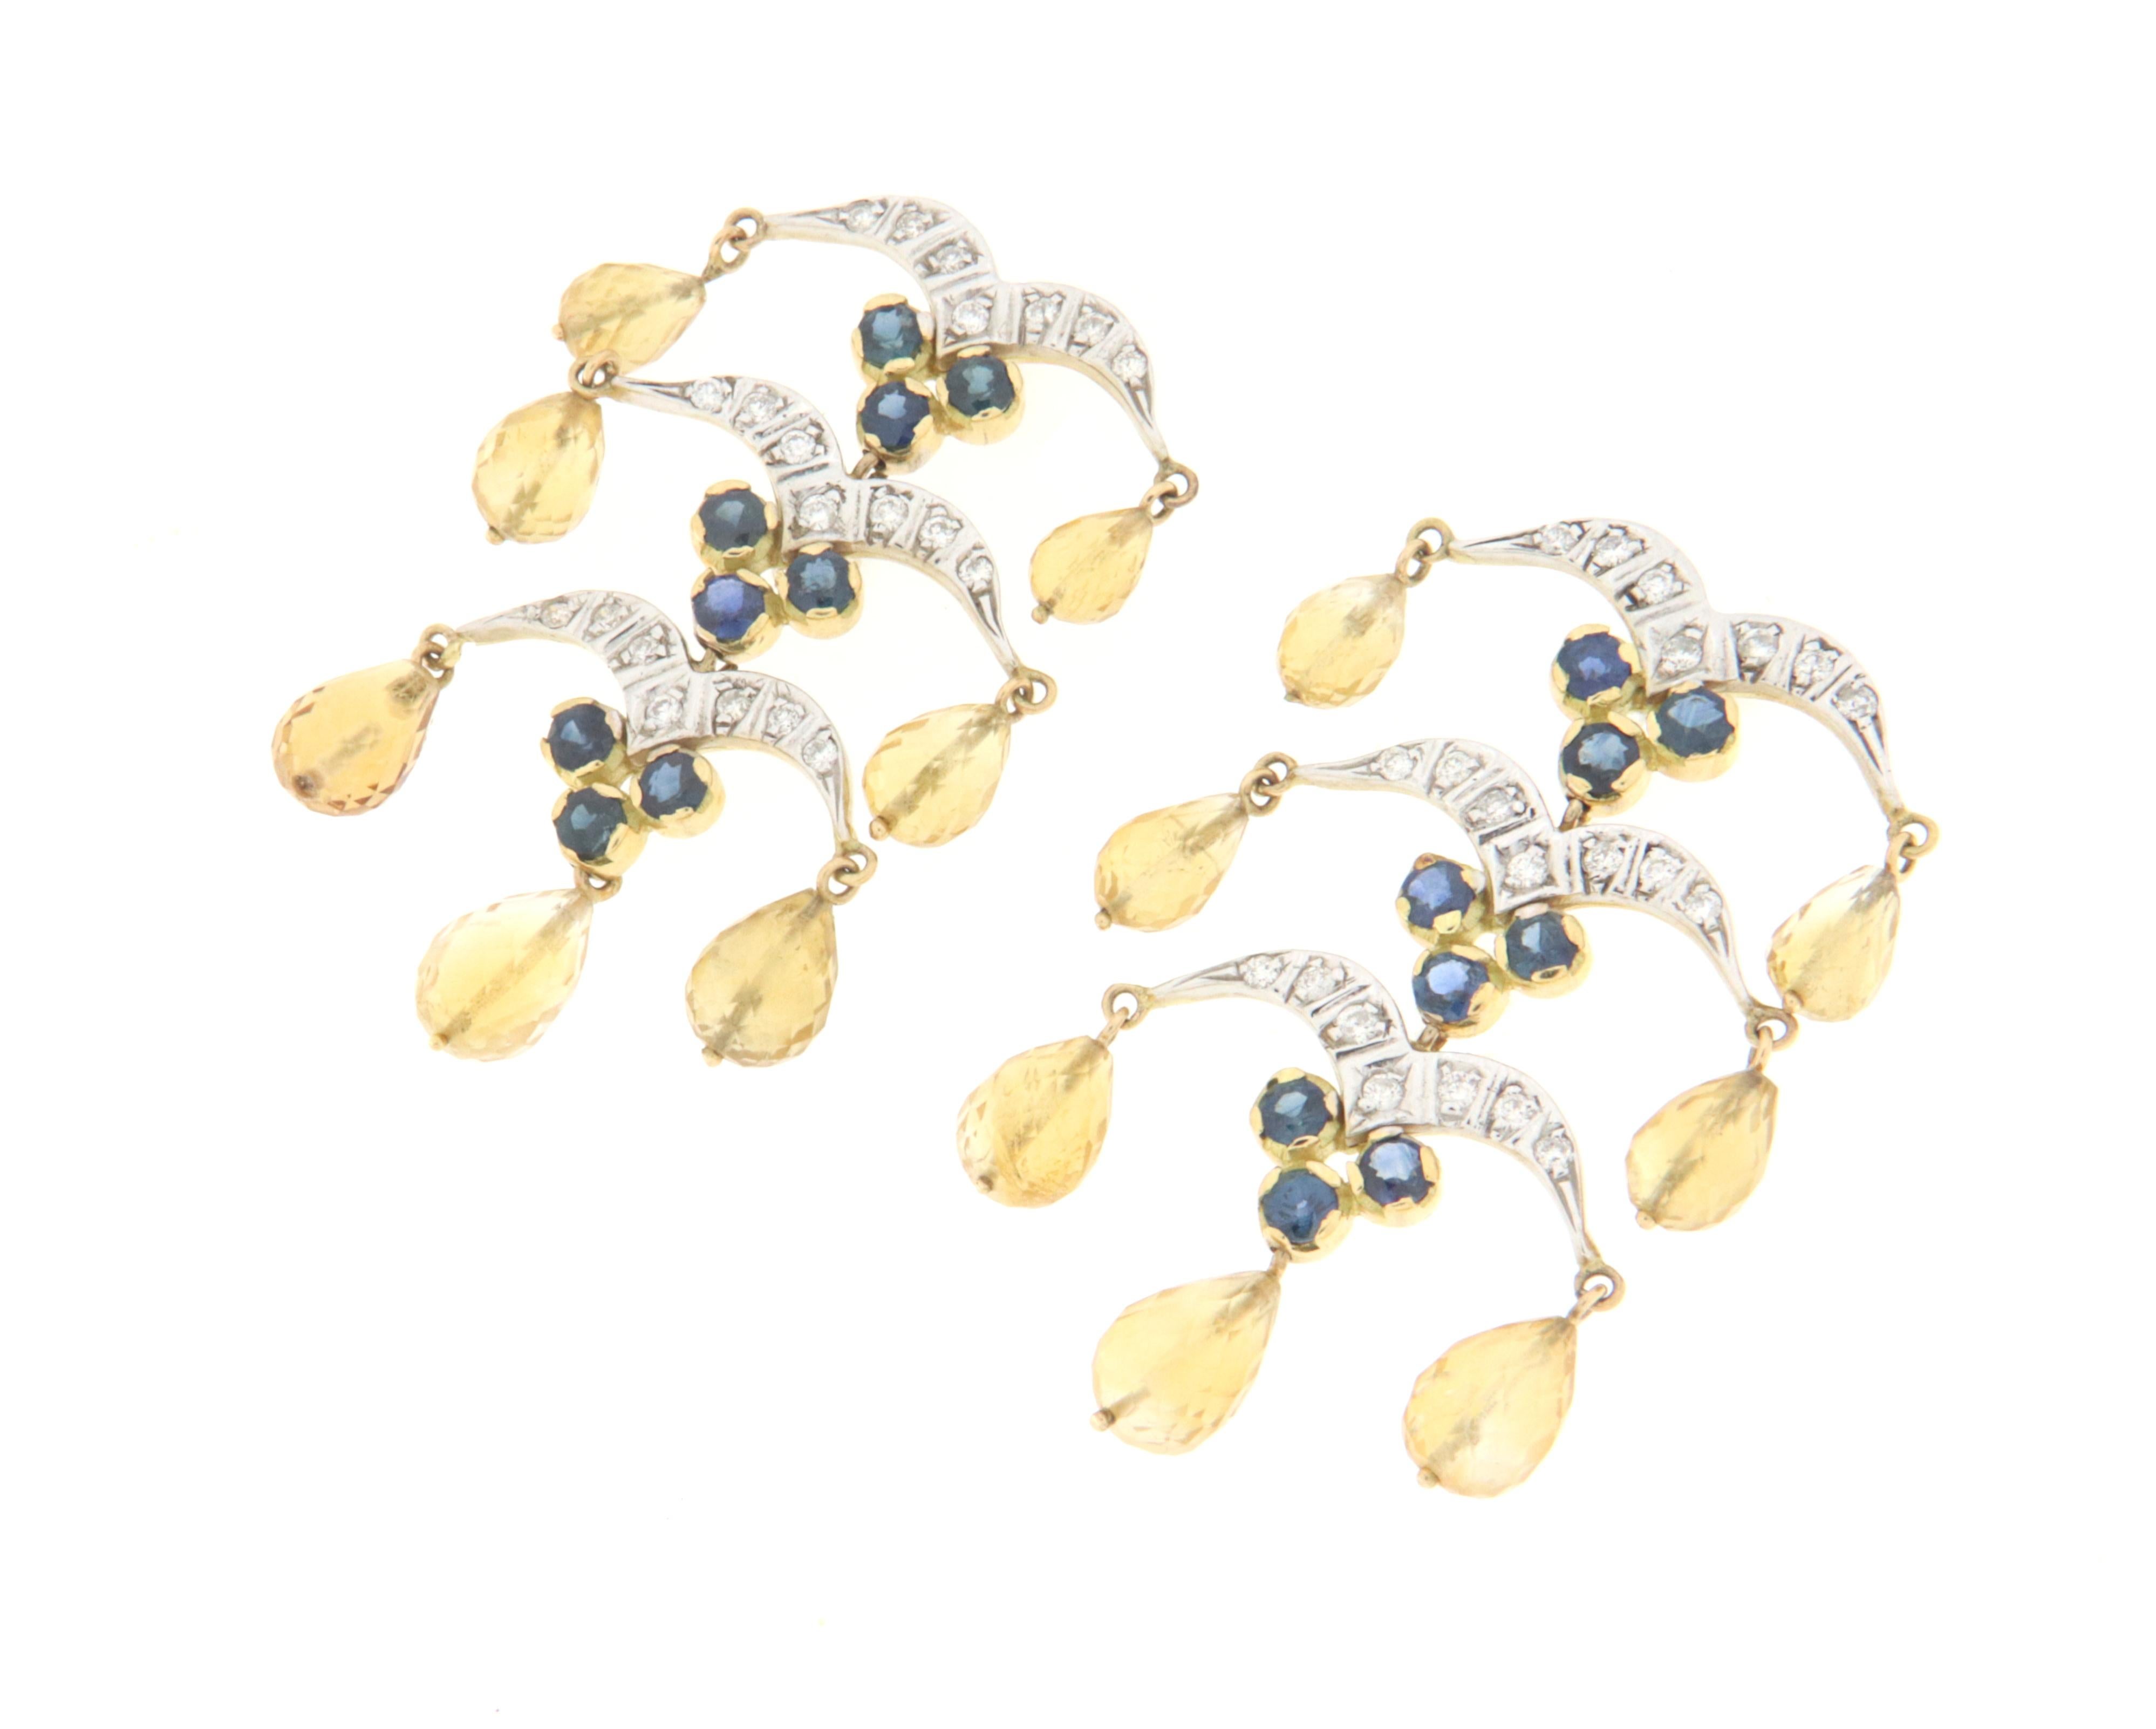 Elegant earring made entirely by hand in 18k white gold and yellow, set with sapphires, diamonds and pear-shaped pendants of faceted yellow citrine.
A jewel that has an effect on a woman's lobe suitable for any type of occasion, a jewel that any